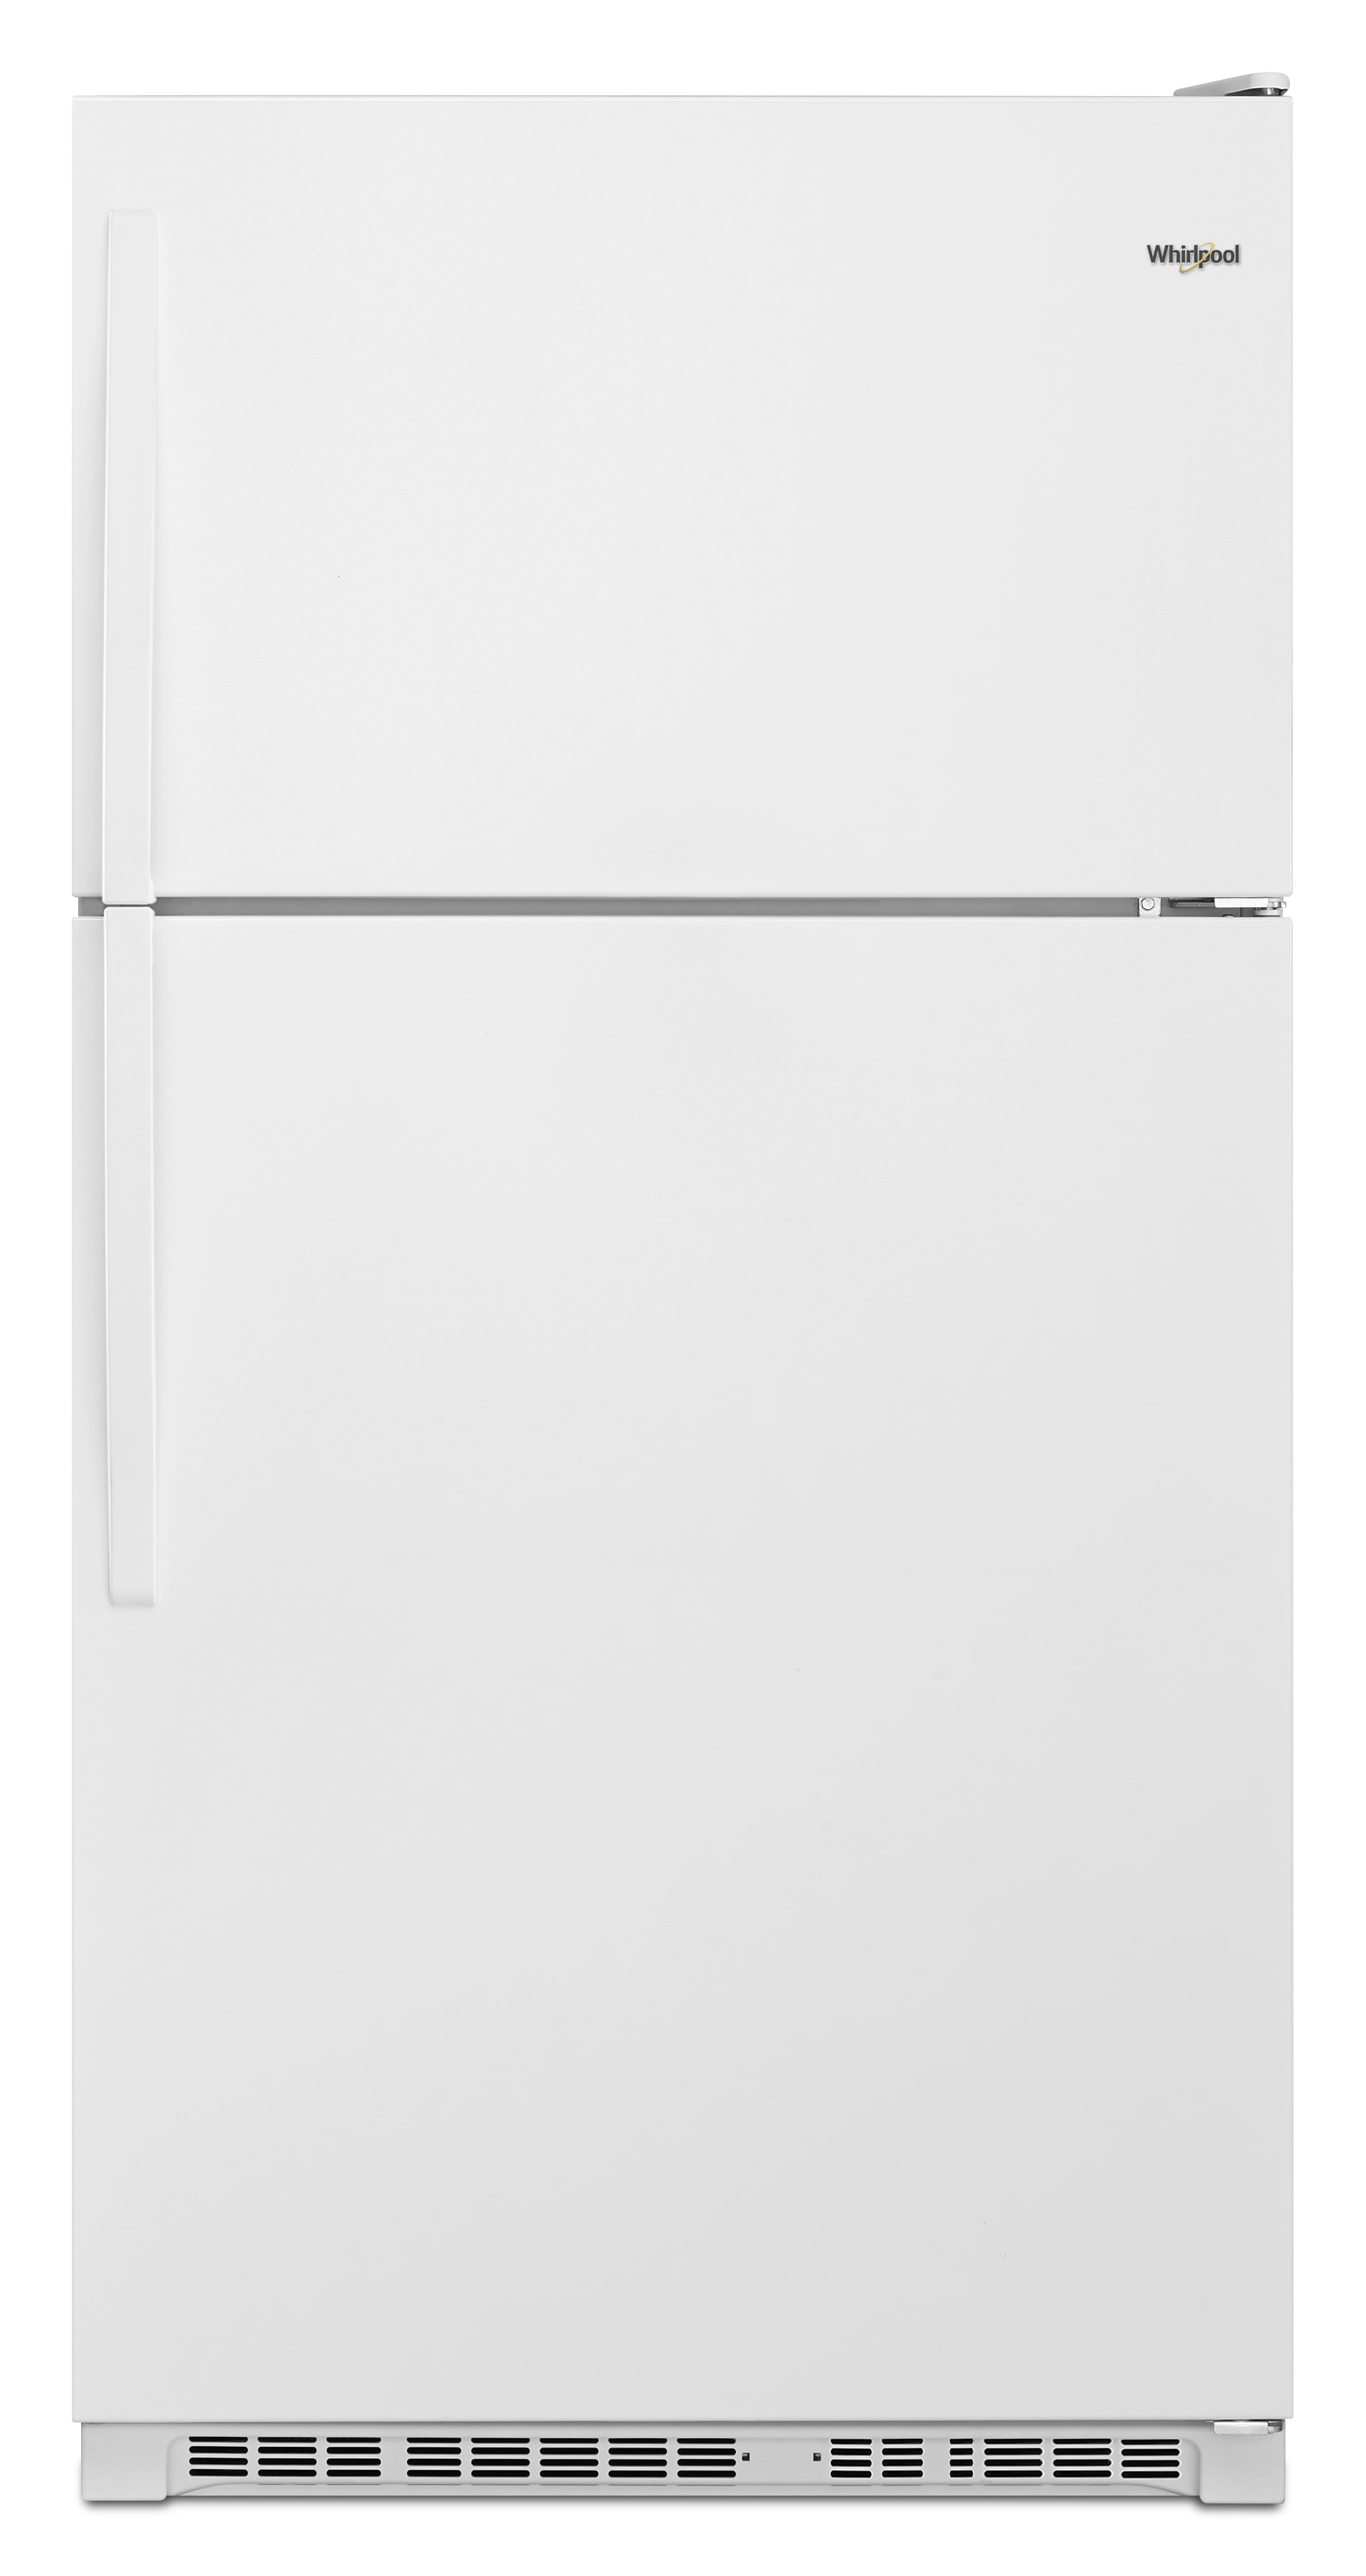 Whirlpool 20.5-cu ft Top Freezer Refrigerator with Optional (sold  separately) Ice Maker Kit- White in the Top-Freezer Refrigerators  department at Lowes.com